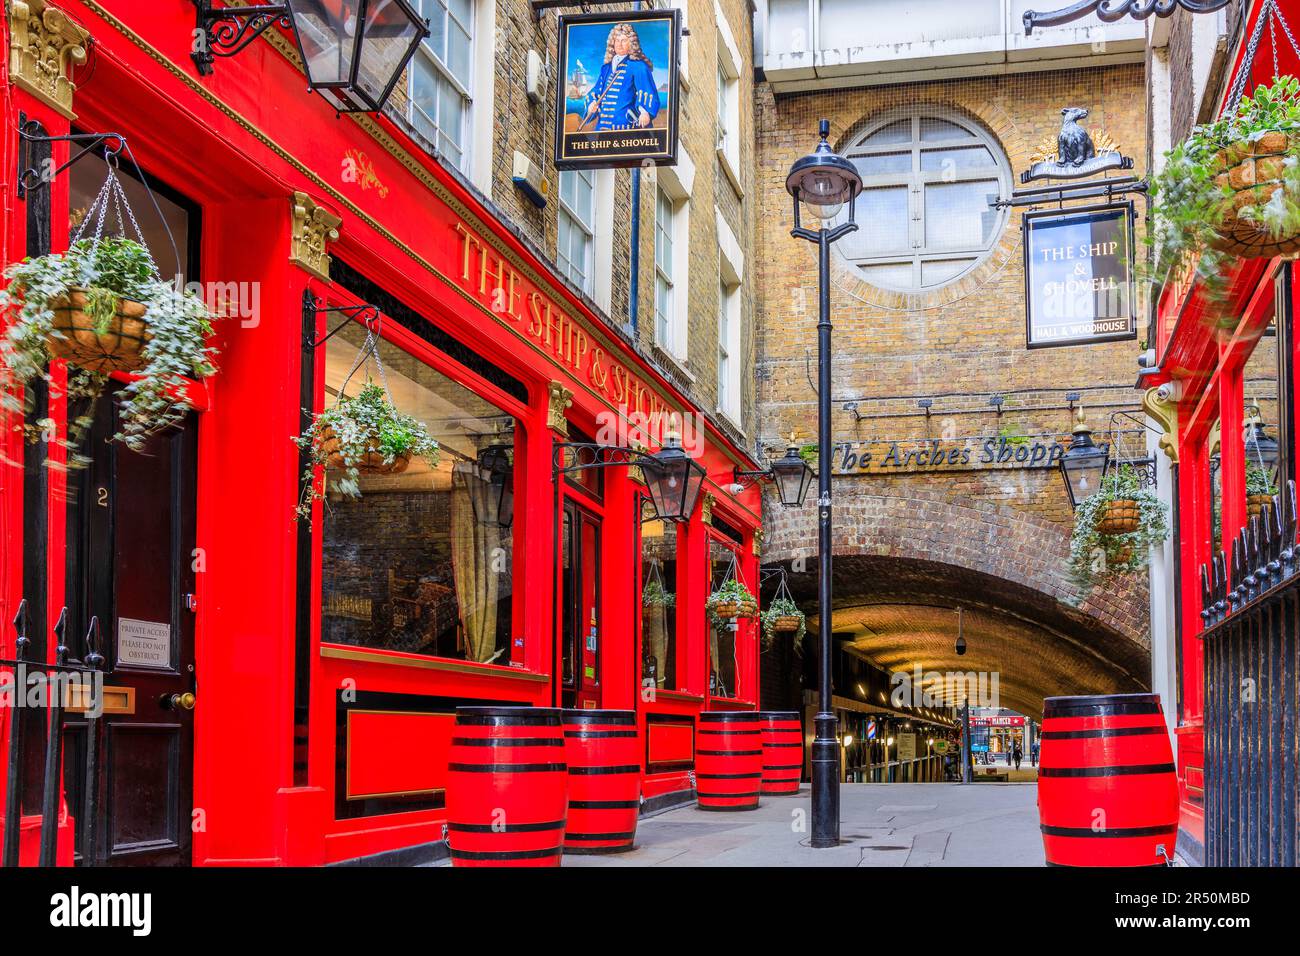 London, United Kingdom - March 16, 2023: The ship and shovell pub in London. Stock Photo